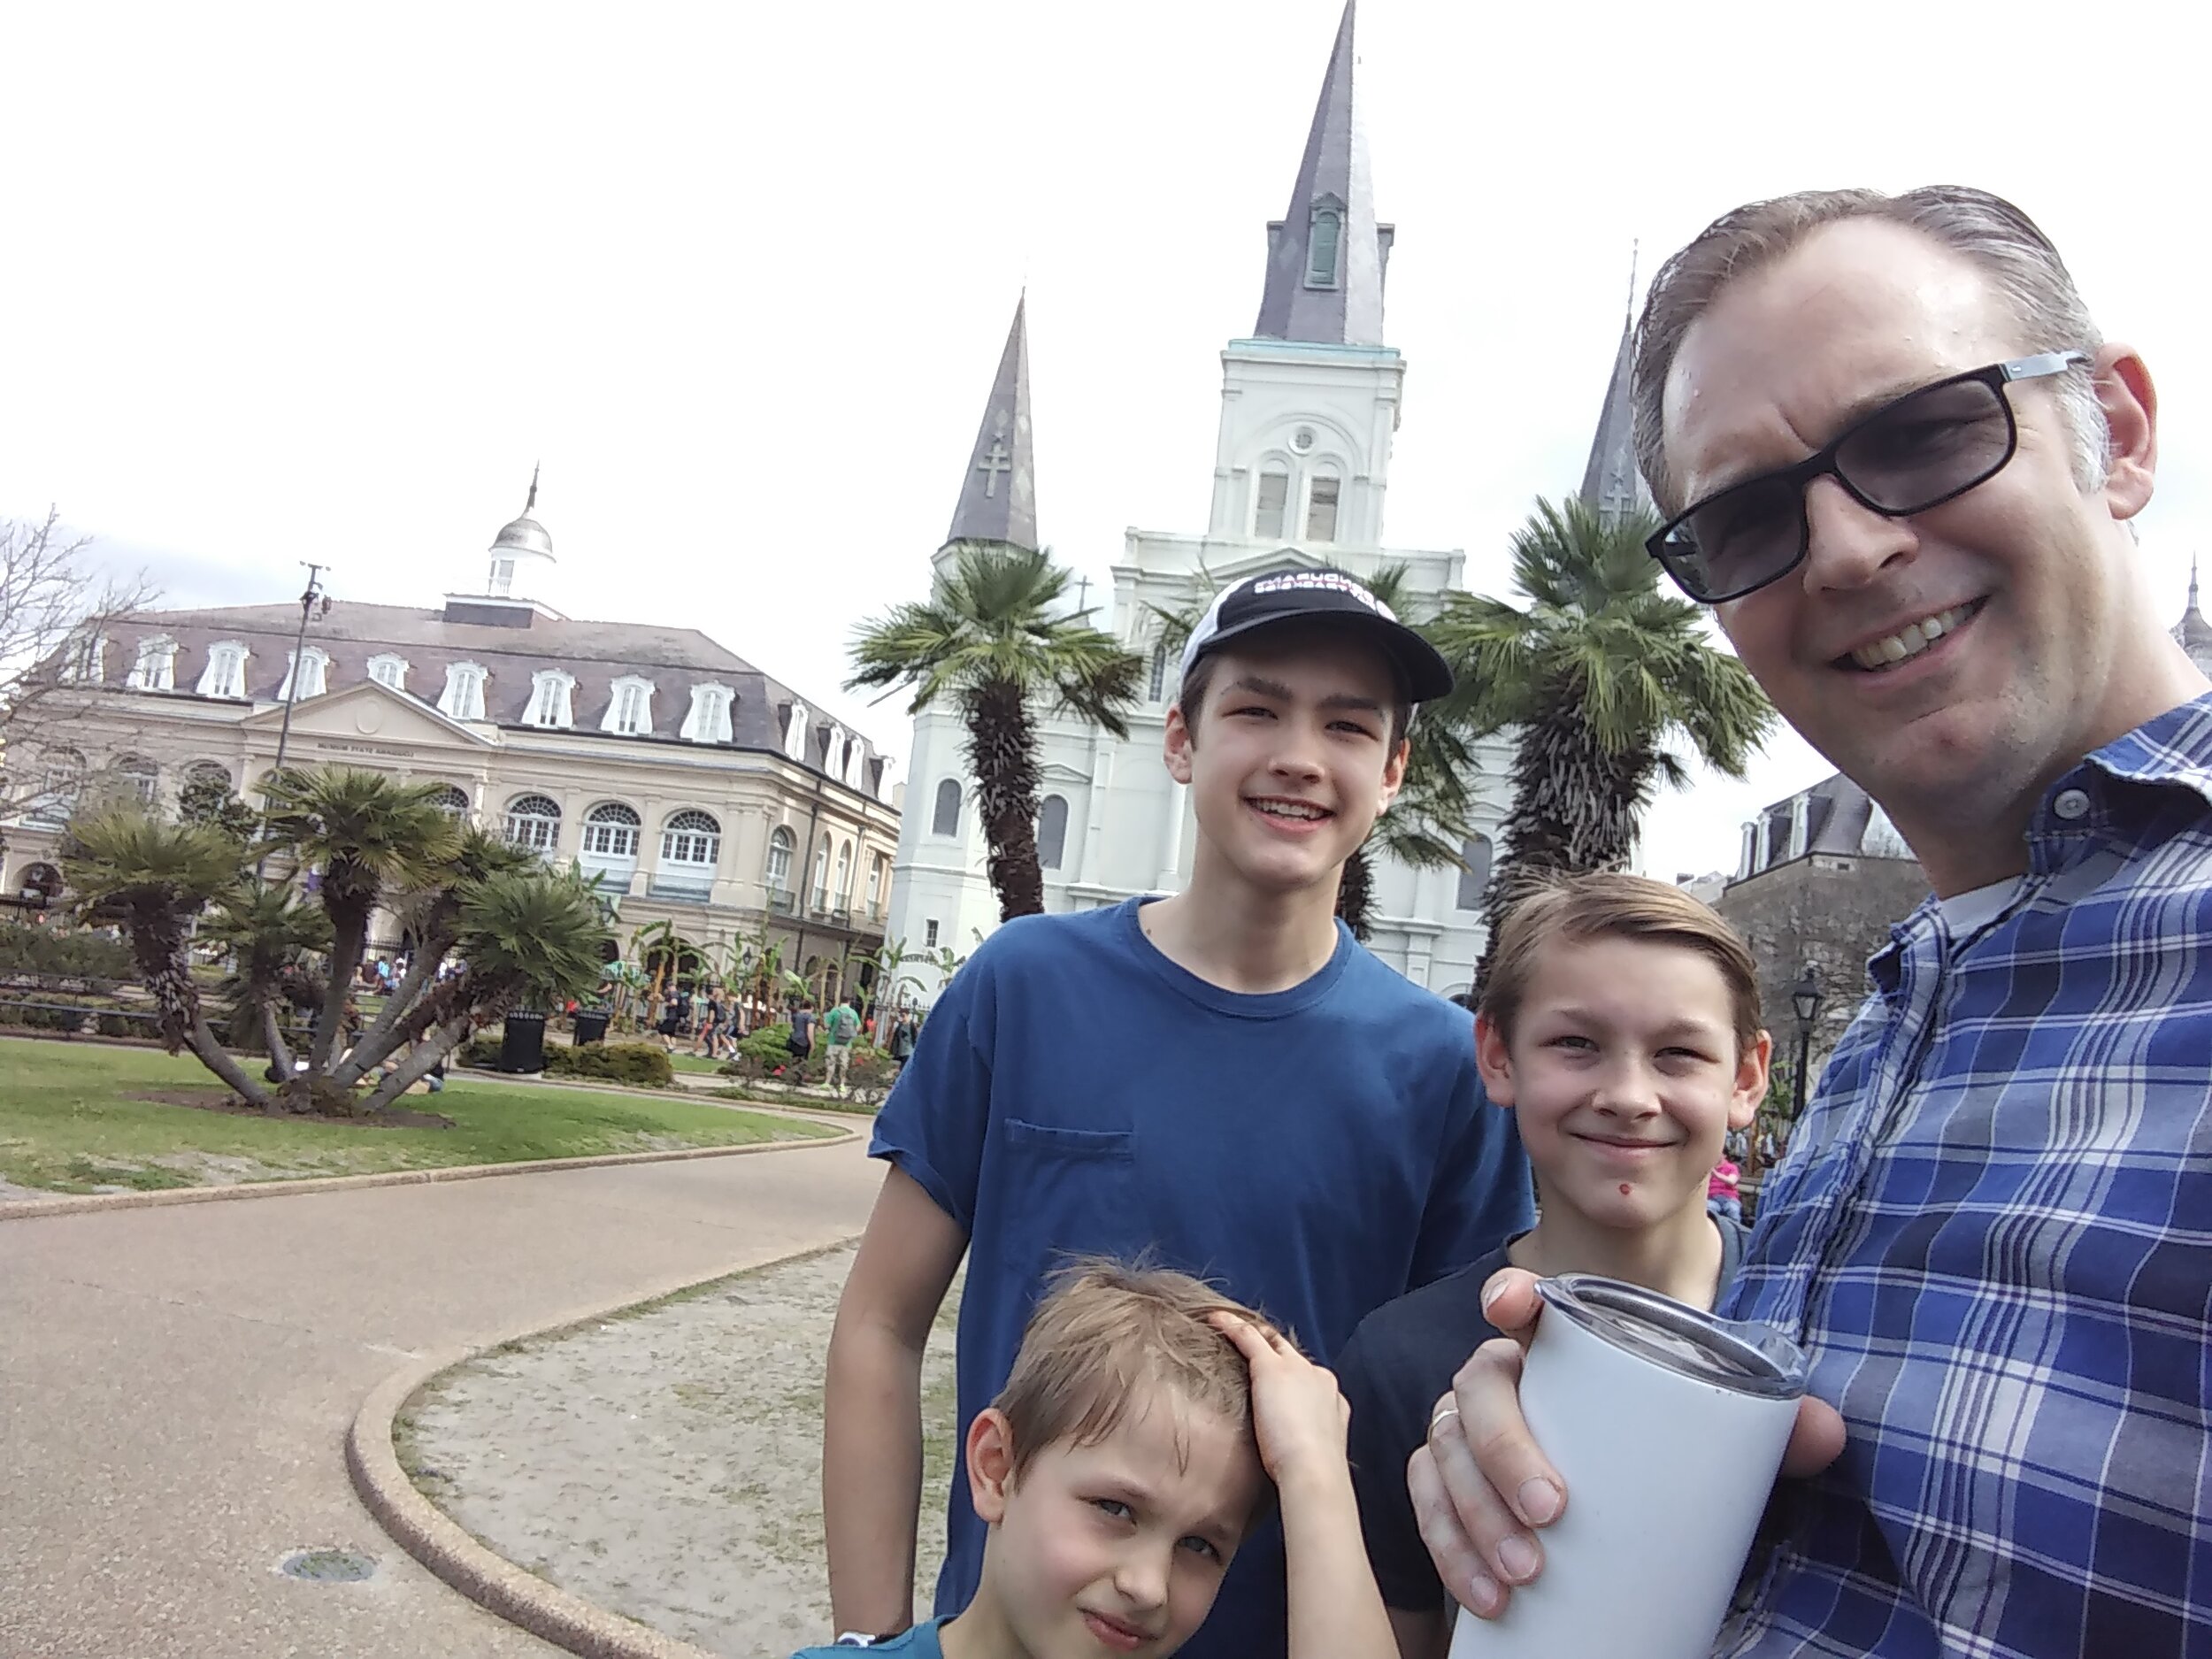  New Orleans to give a “Reclaiming Fatherhood” for Fraternus. 